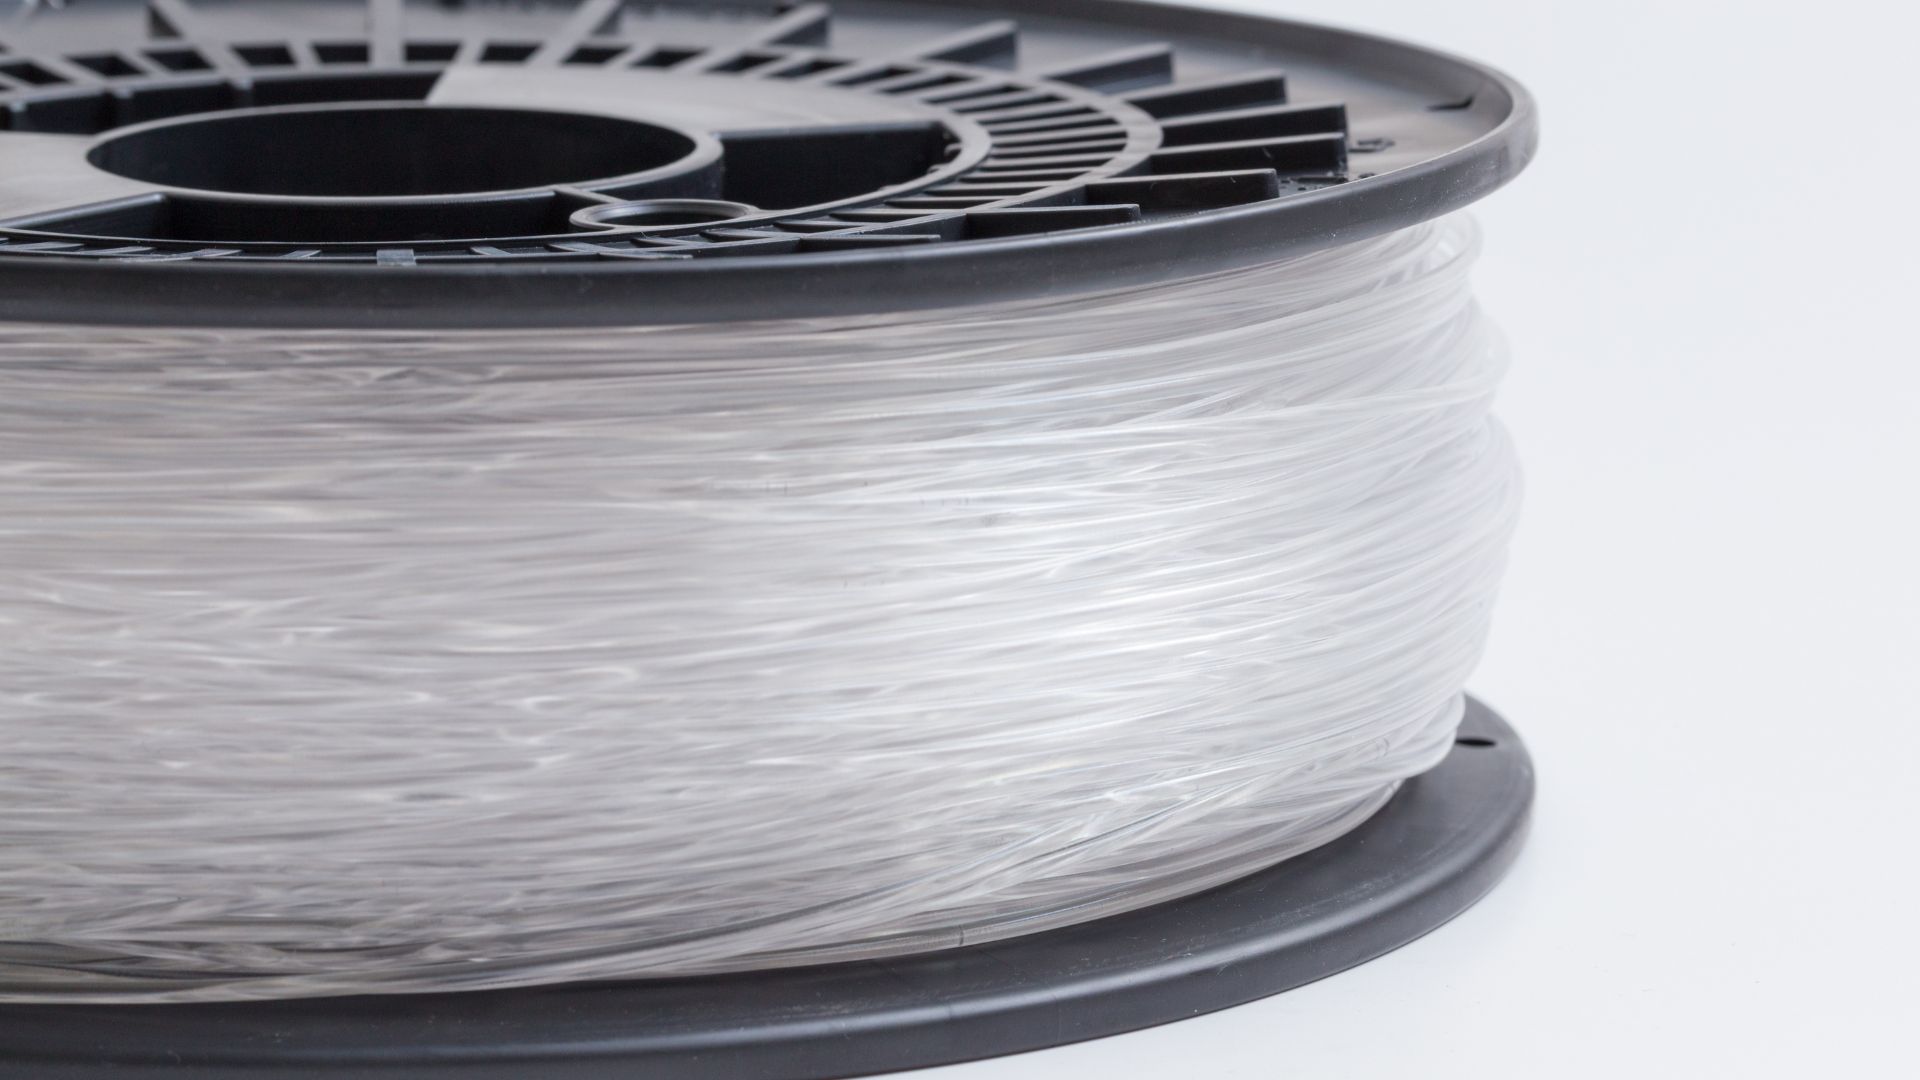 5 Tips for Printing With Nylon Glass Filament Like a Pro